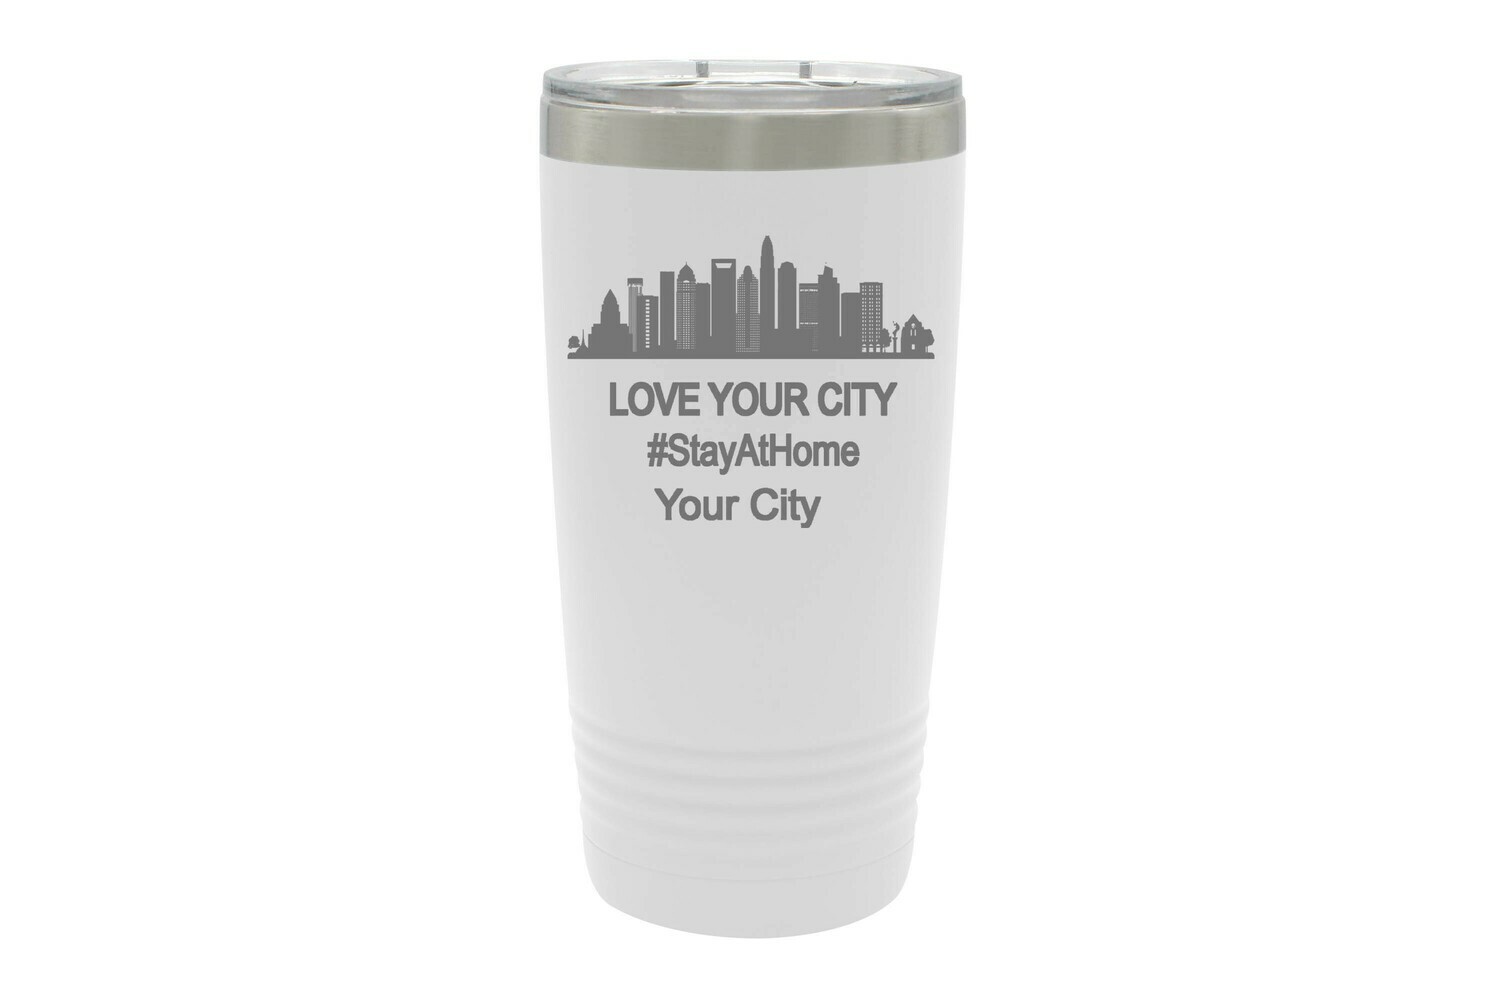 Love Your City/Community (Stayathome/Alonetogether) Insulated Tumbler 20 oz